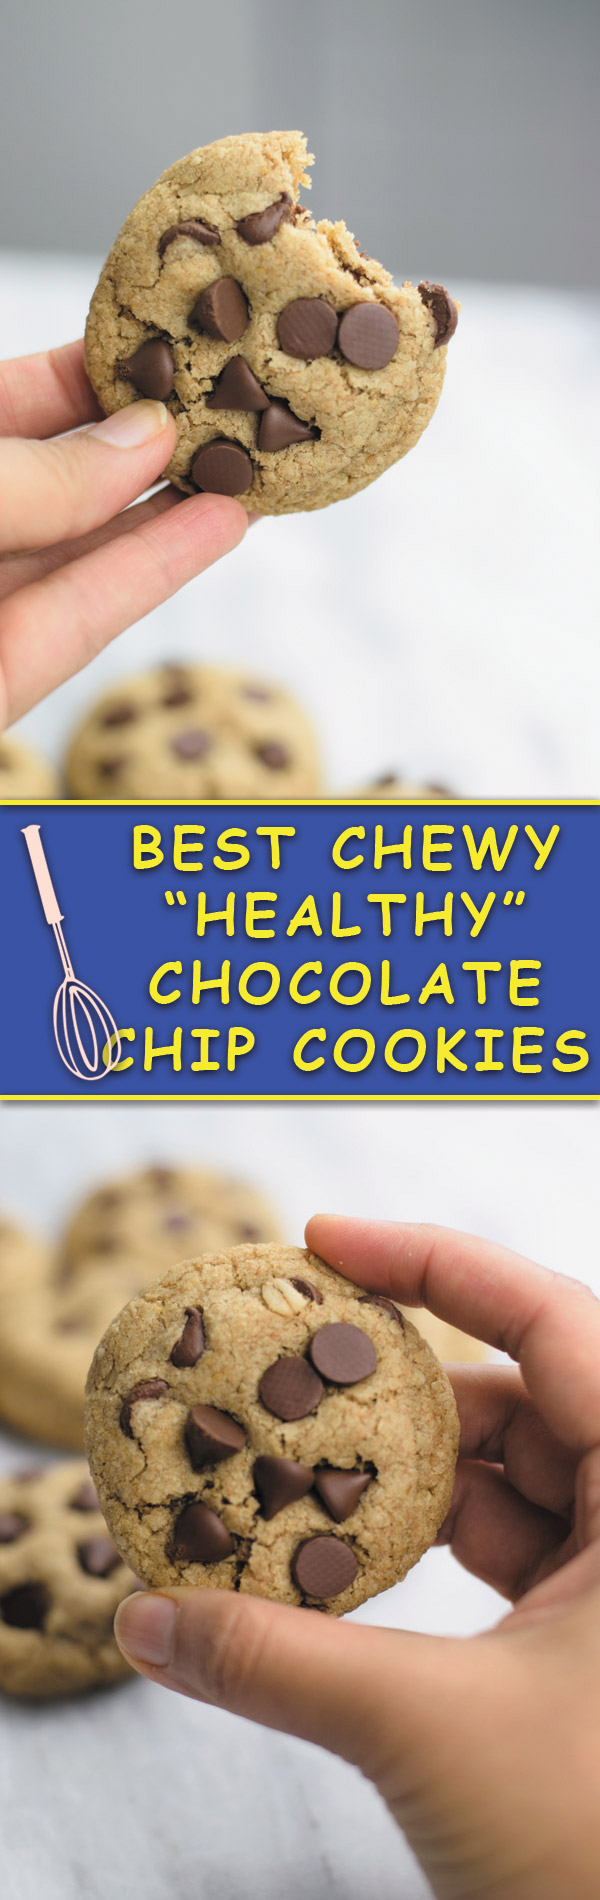 best chewy healthy chocolate chip cookies - THESE cookies have half the fat or regular chocolate chip cookies BUT SAME GREAT SOFT & CHEWY taste! Whole wheat flour and oats make it extra good!